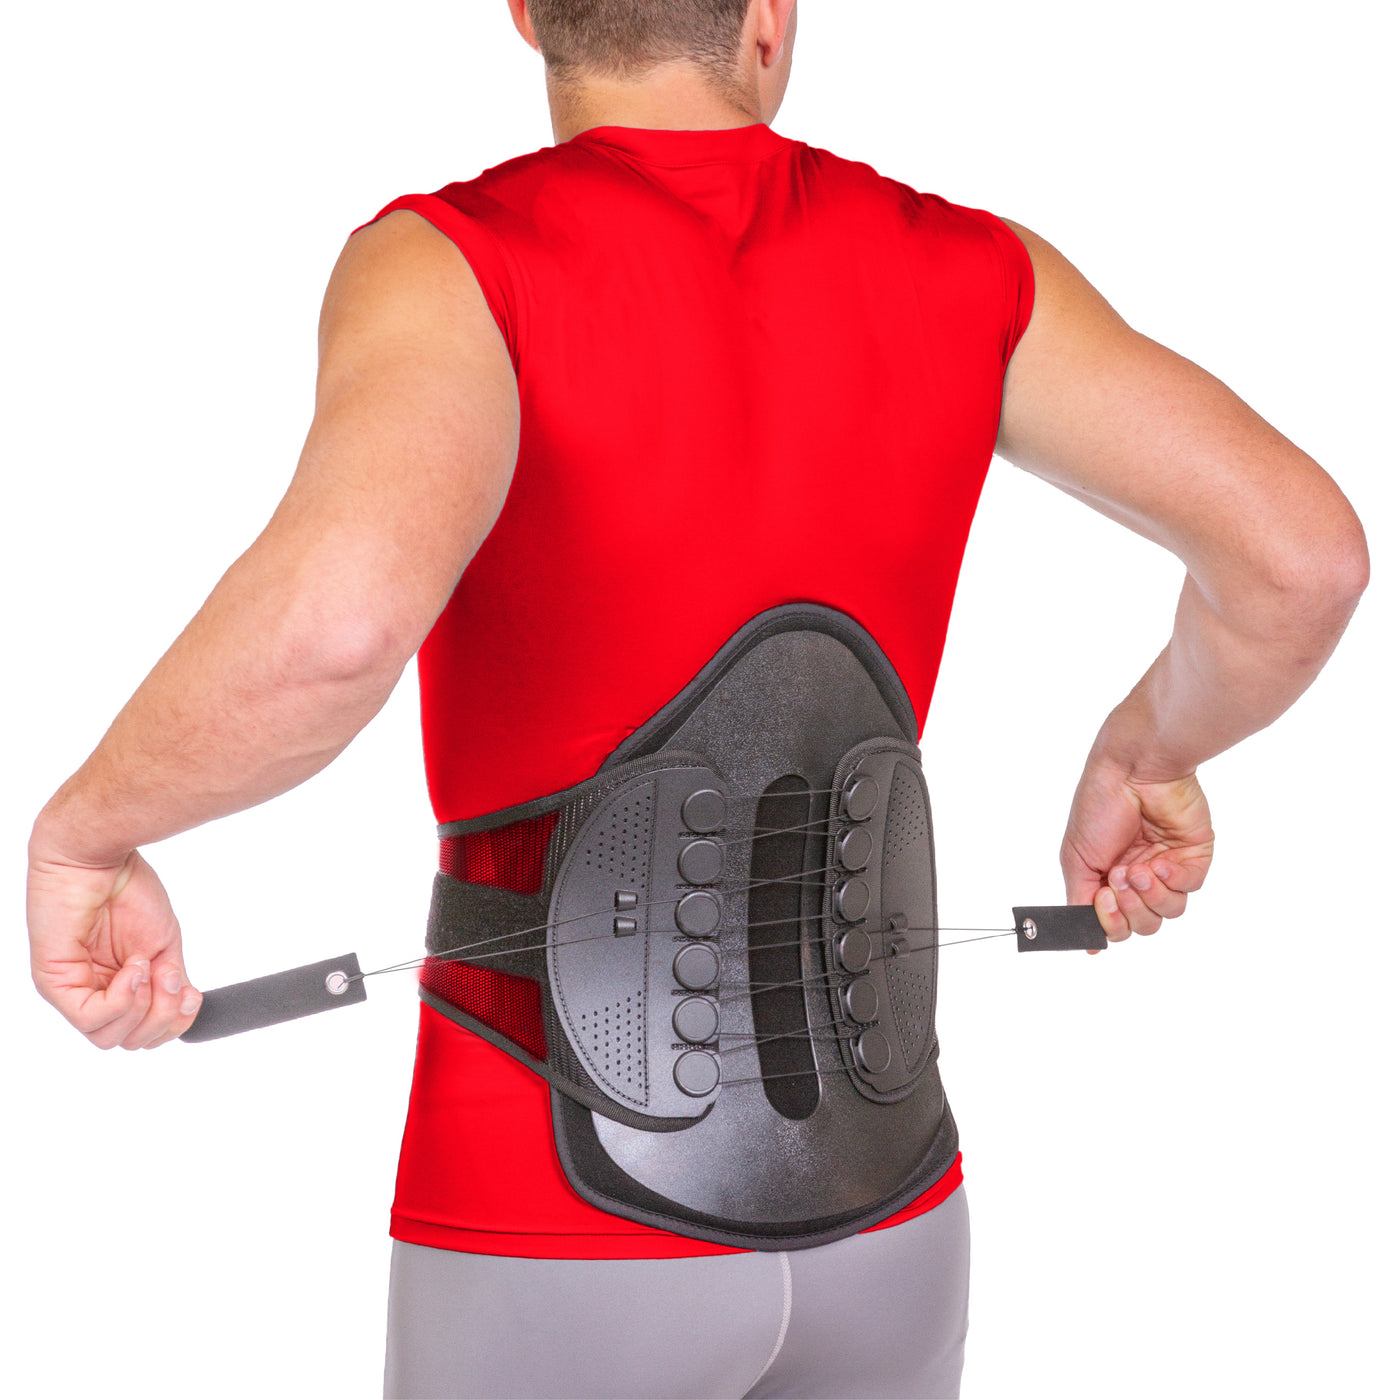 Lower Back Pain Relief Spinal Decompression Device